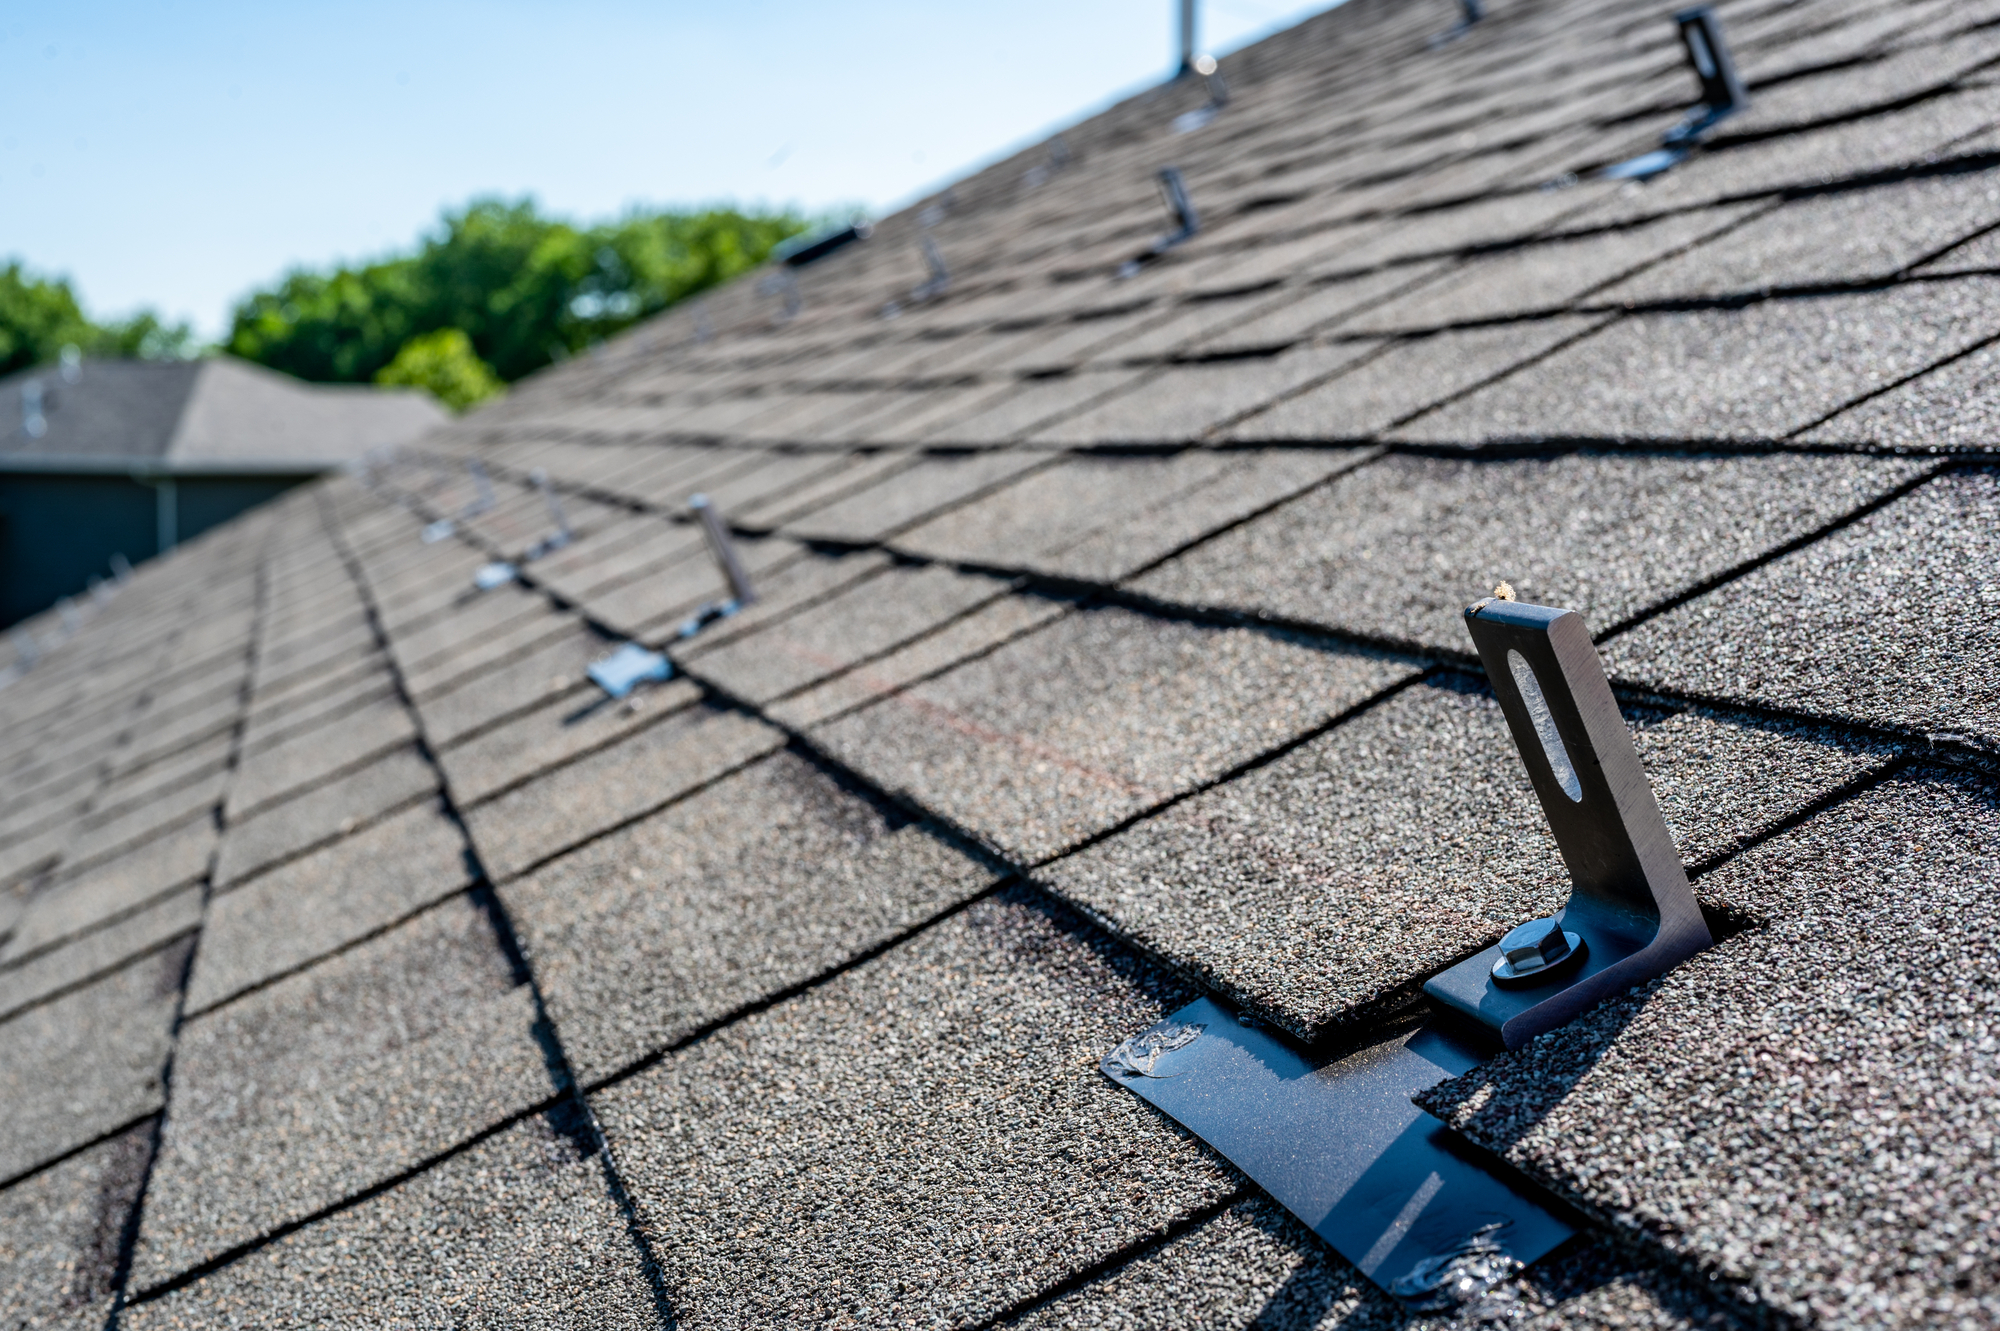 Residential asphalt shingle roof with metal anchors installed for the installation of a solar panel rail and racking system